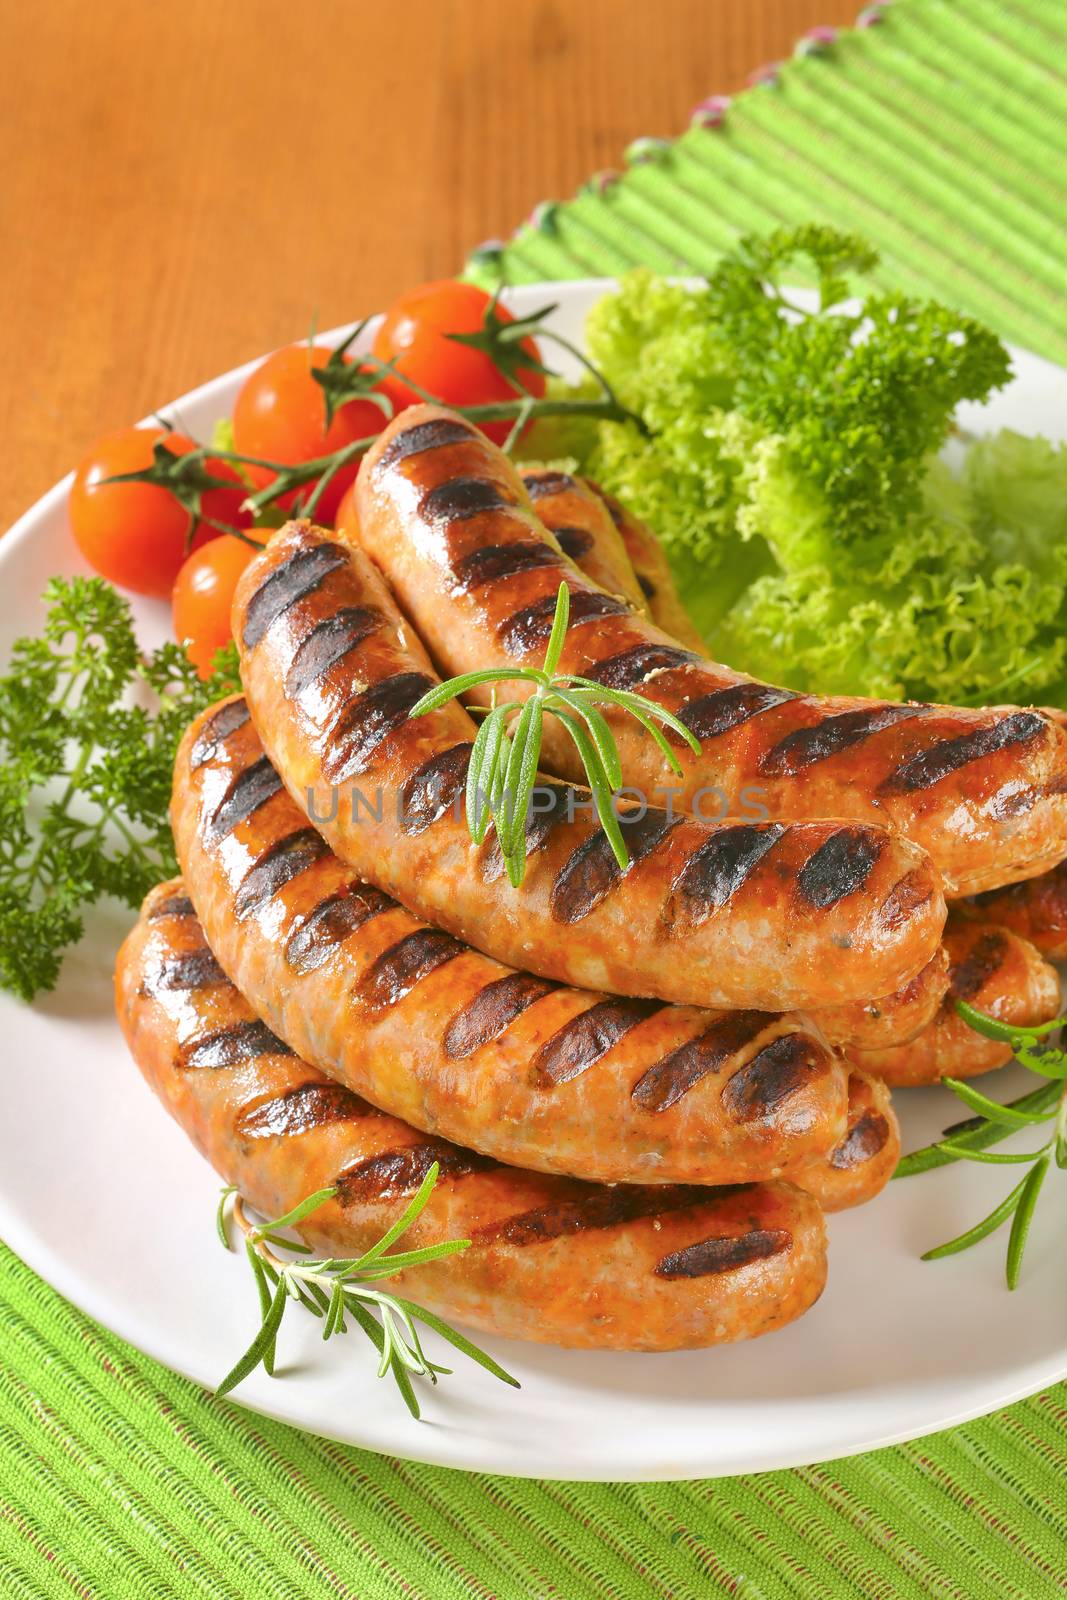 Grilled German sausages by Digifoodstock